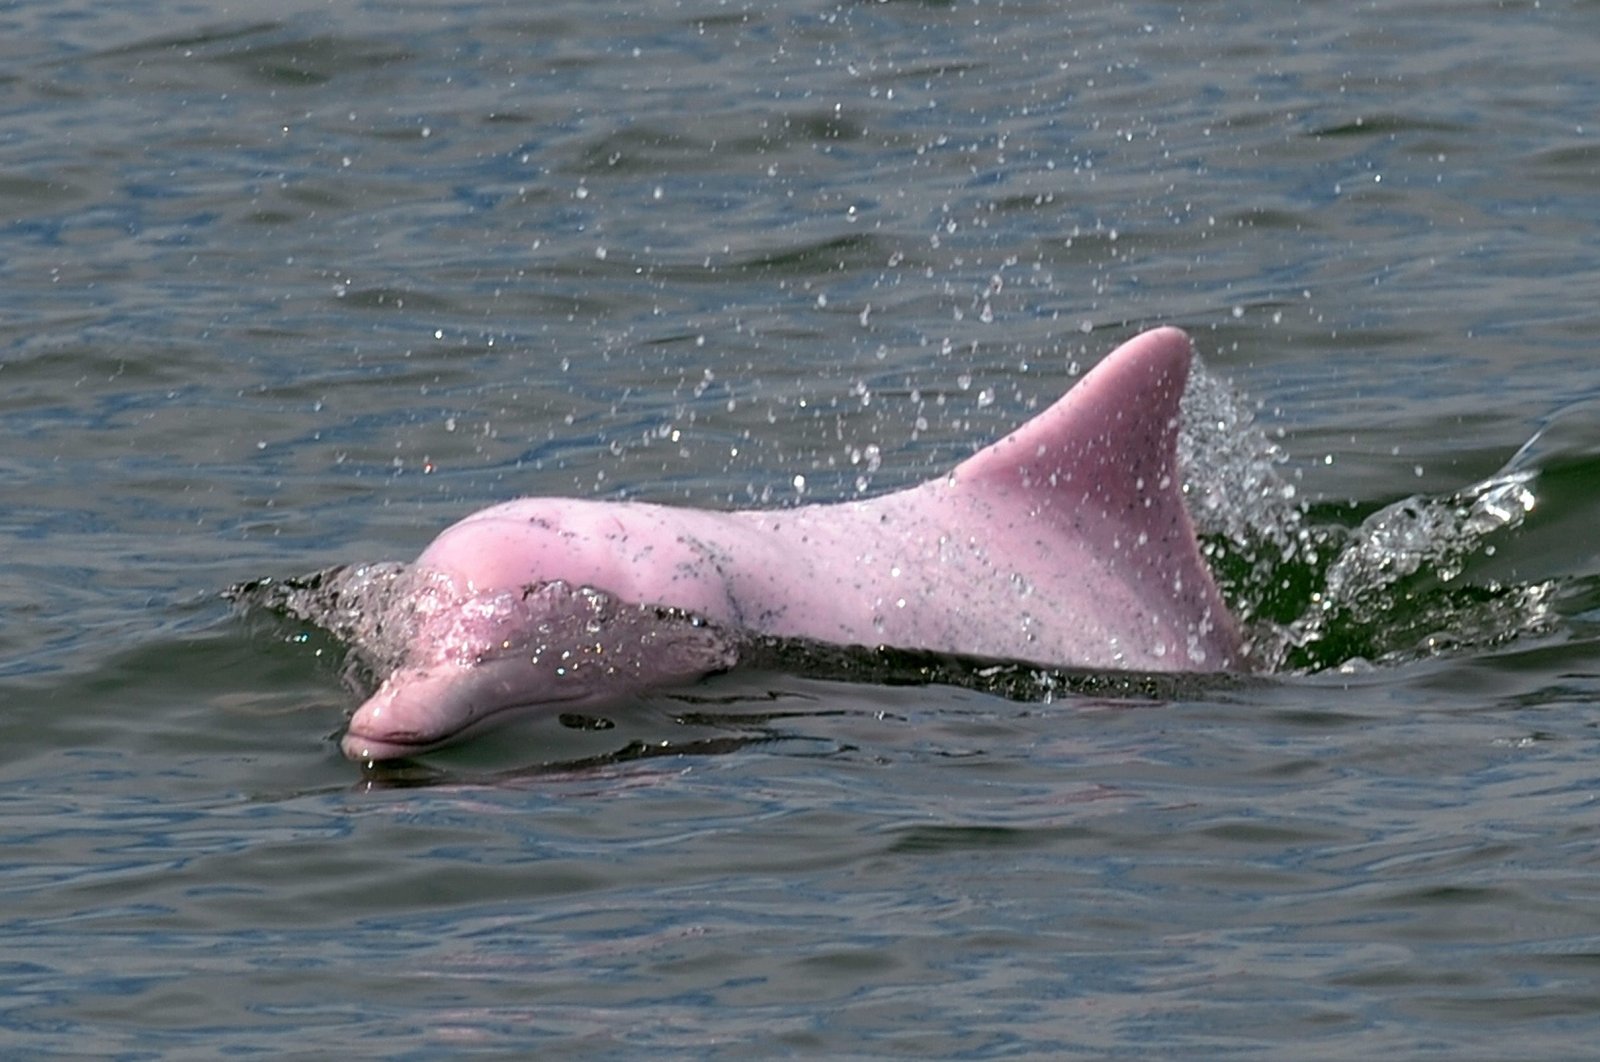 A Chinese white dolphin or Indo-Pacific humpback dolphin, nicknamed the pink dolphin, swims in waters off the coast of Hong Kong, Aug. 19, 2011. (AFP Photo)